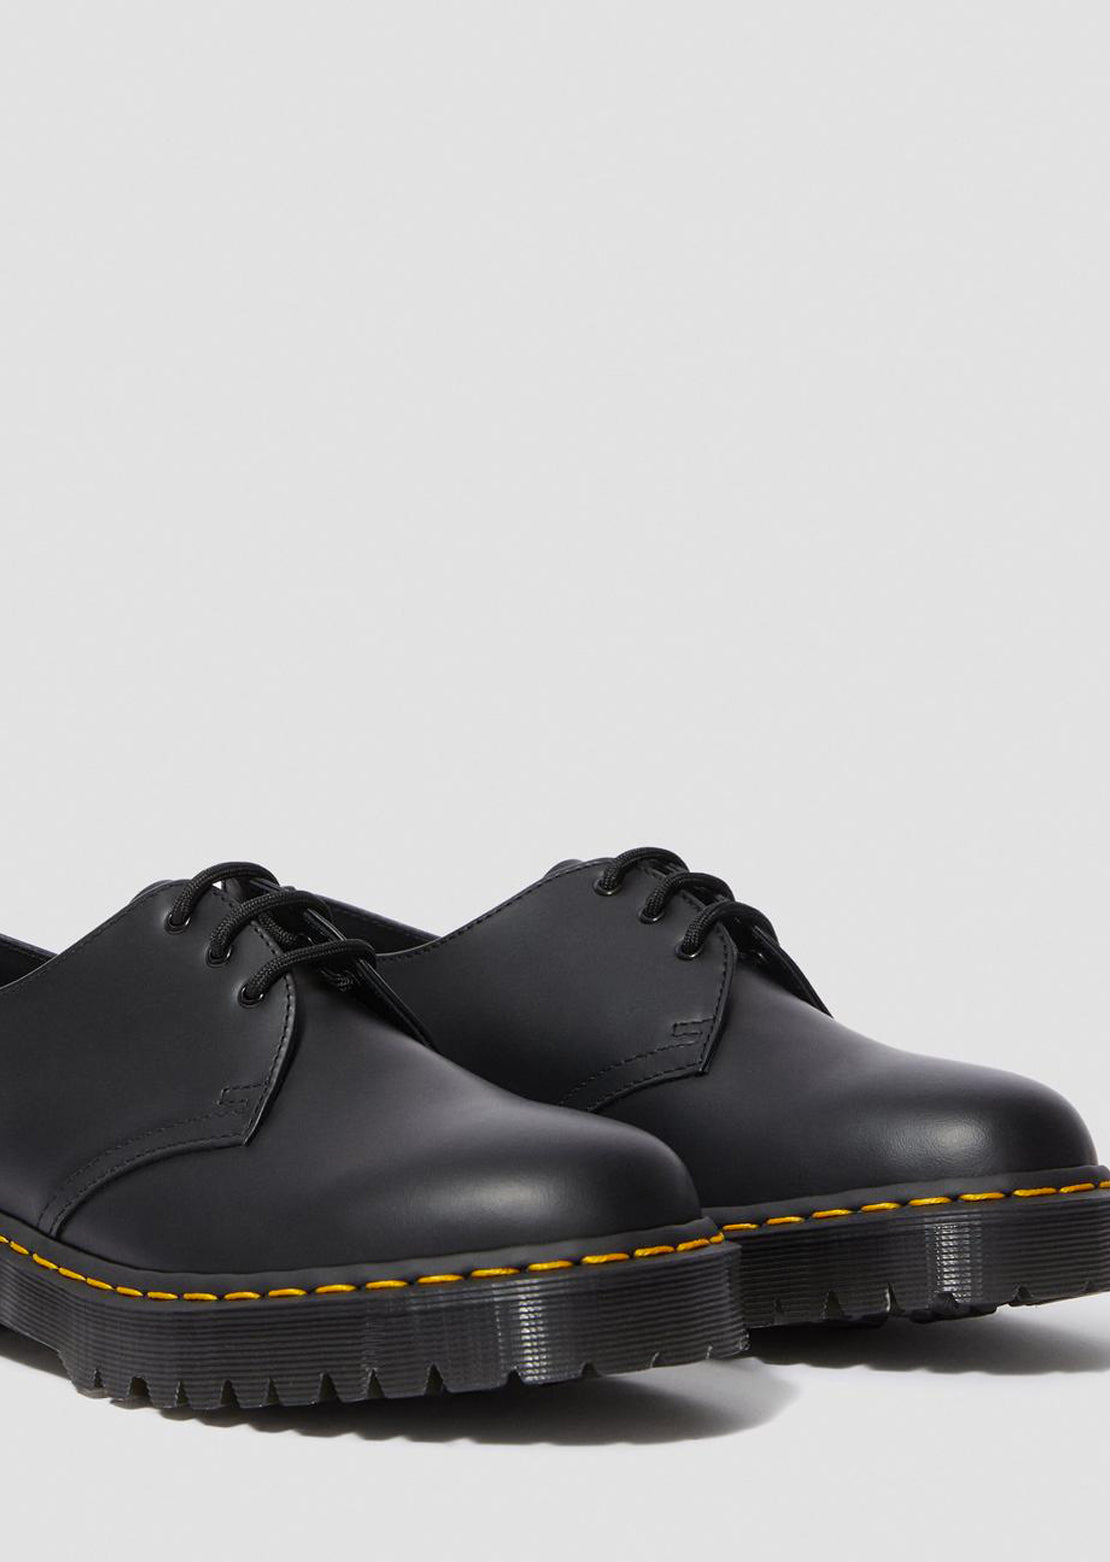 Dr.Martens Women’s 1461 Bex Shoes Black Smooth